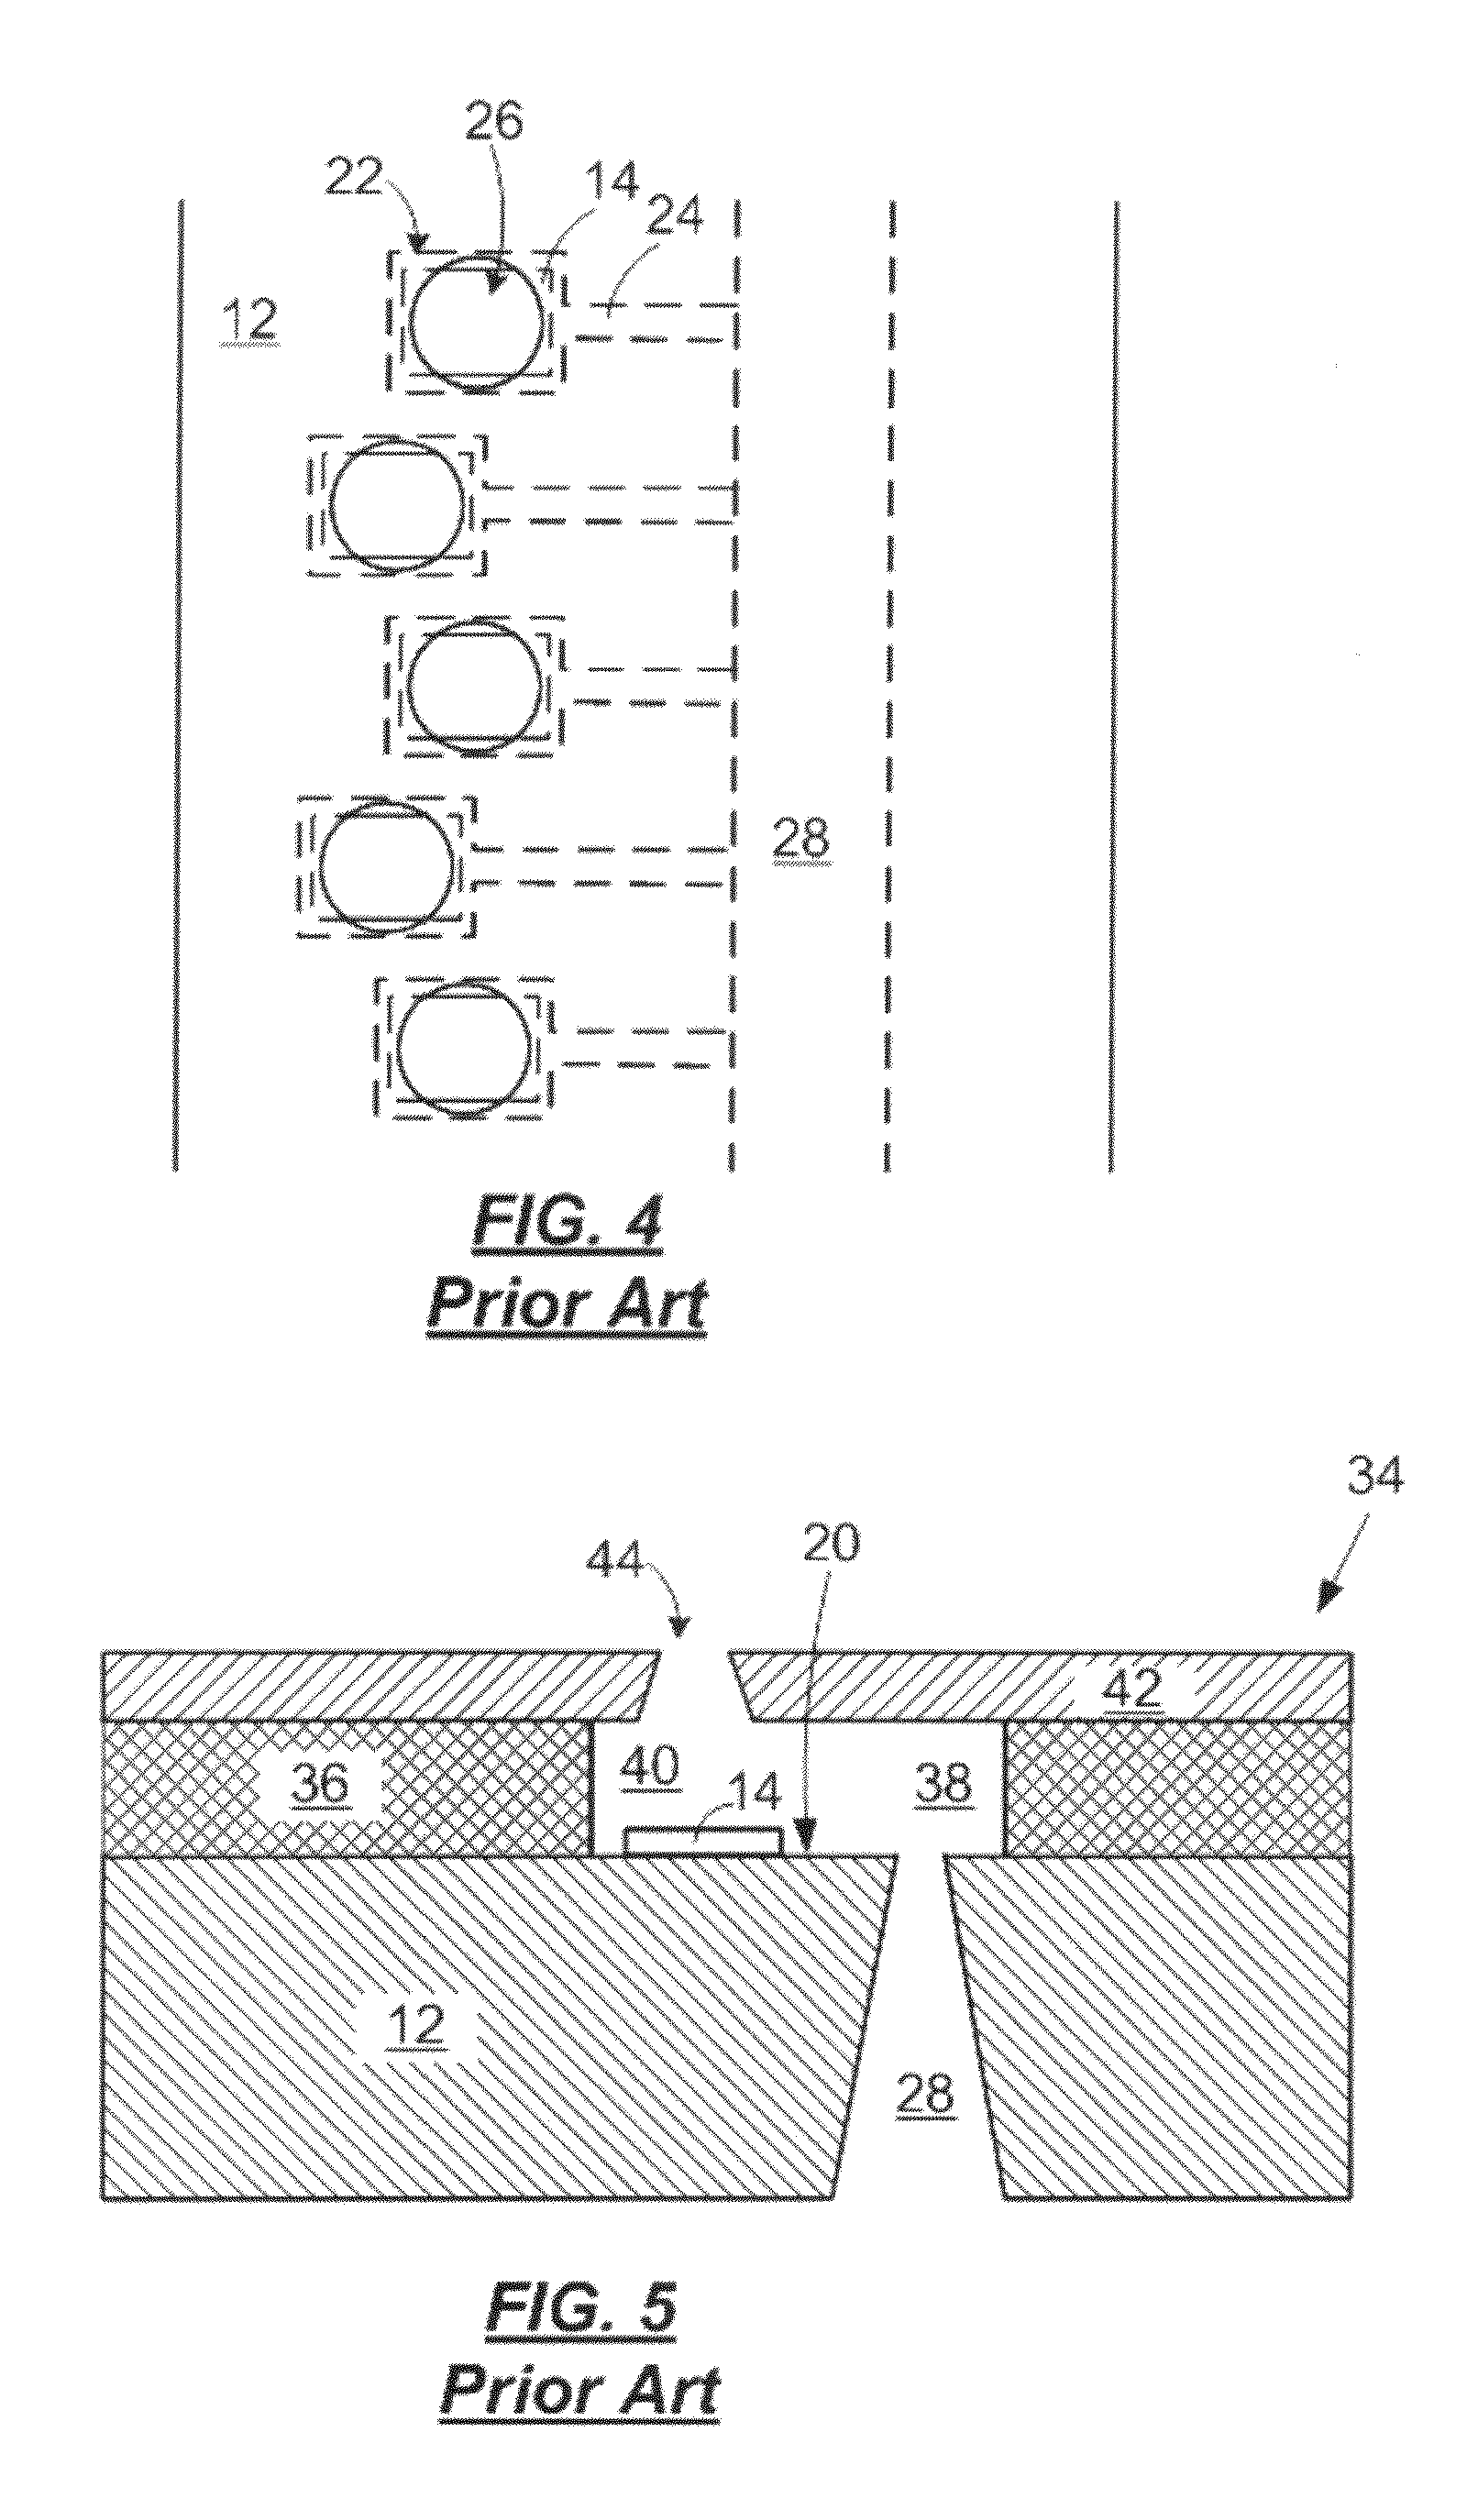 Methods of Etching Polymeric Materials Suitable for Making Micro-Fluid Ejection Heads and Micro-Fluid Ejection Heads Relating Thereto